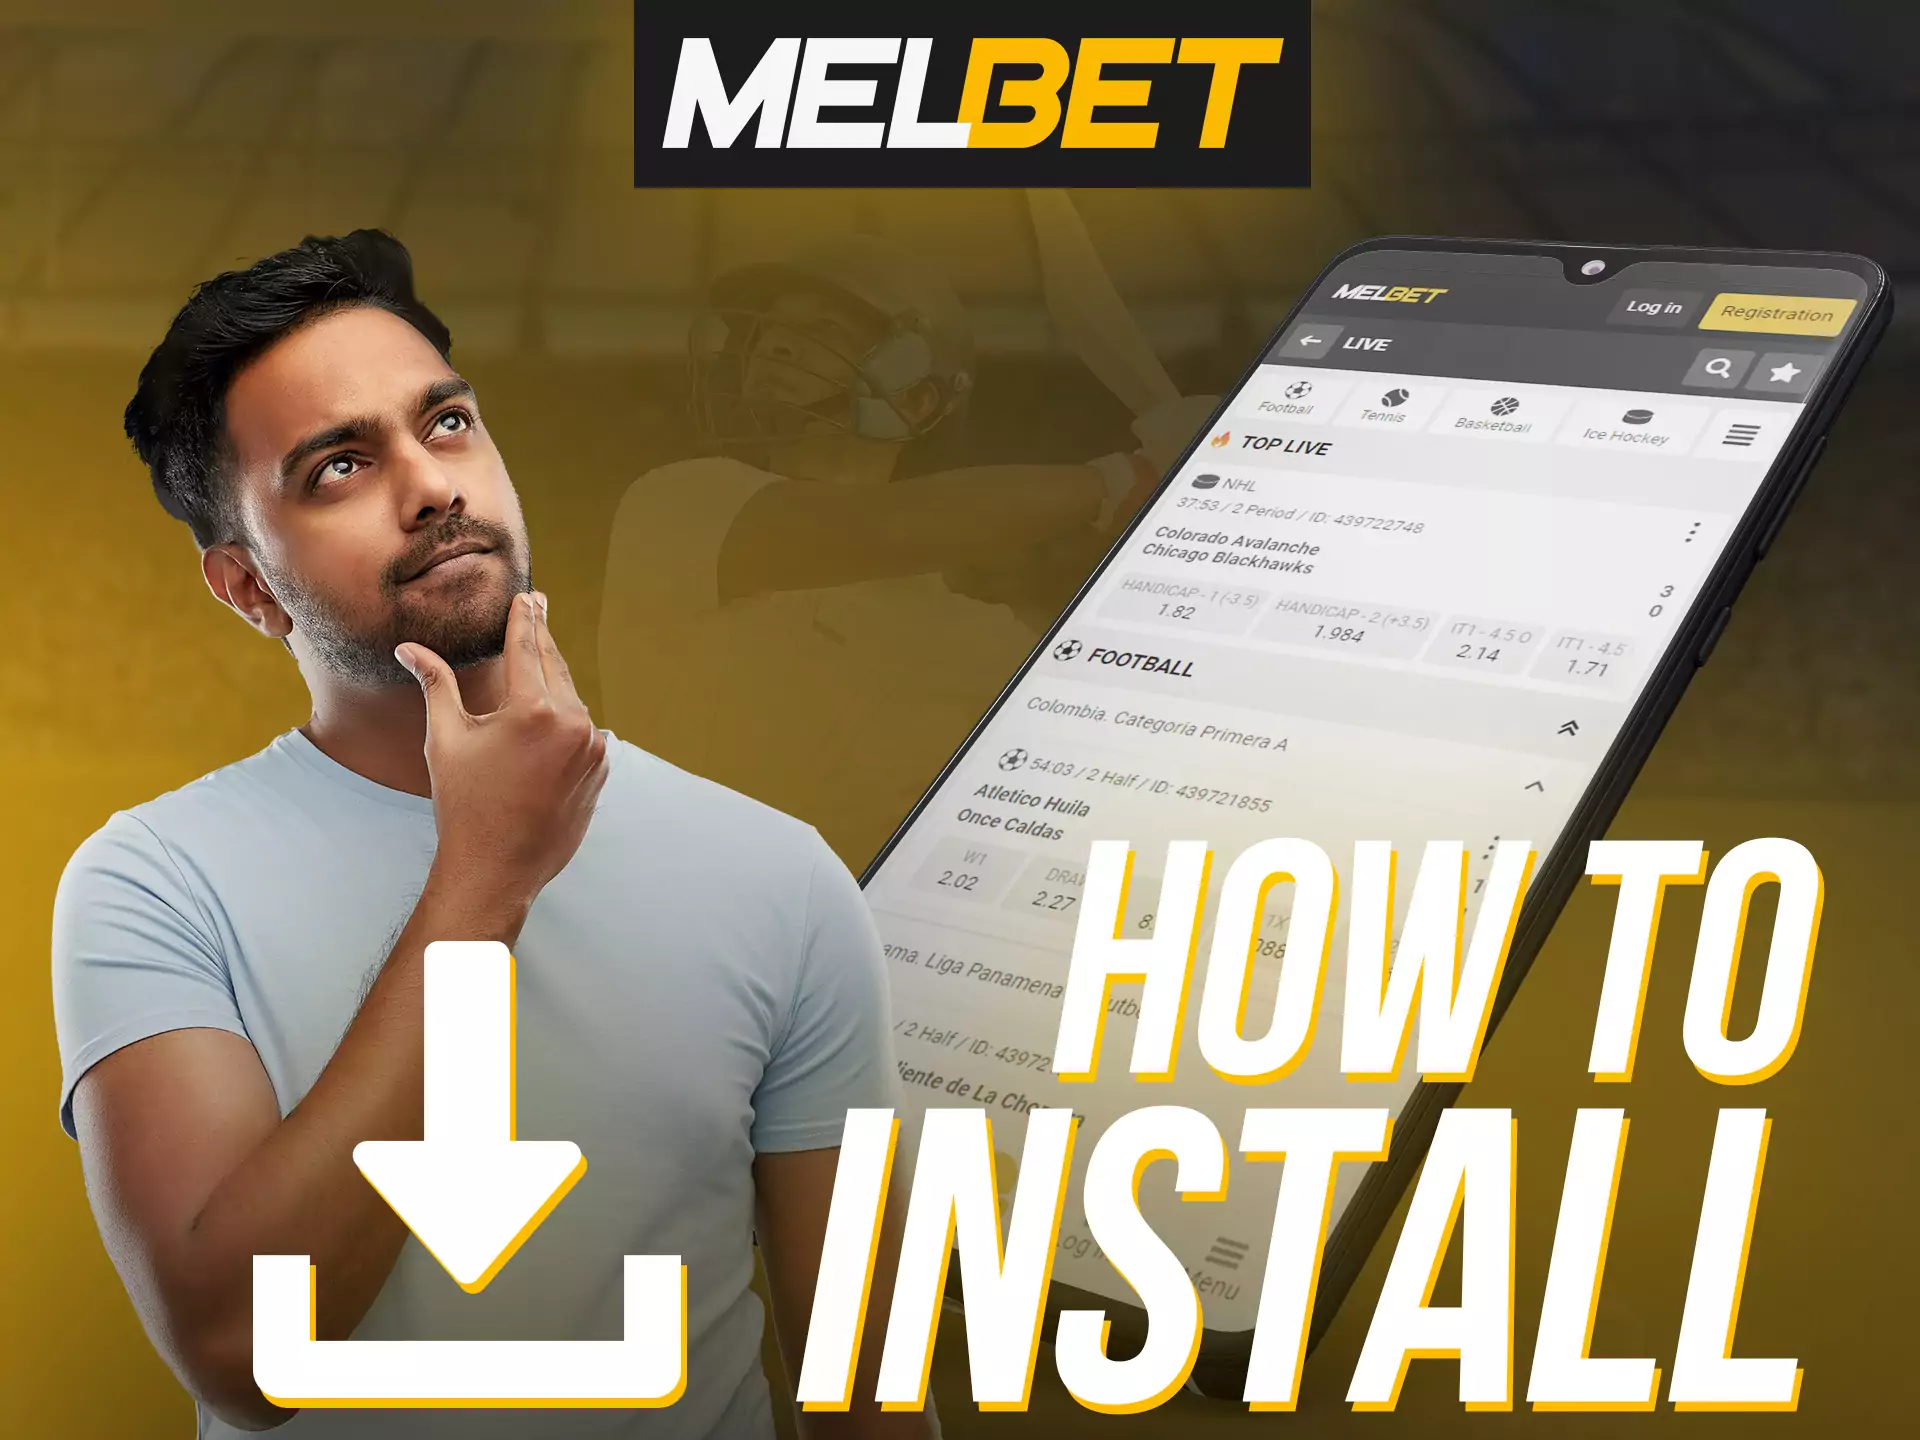 With these instructions, it's easy to install the Melbet app on your device.